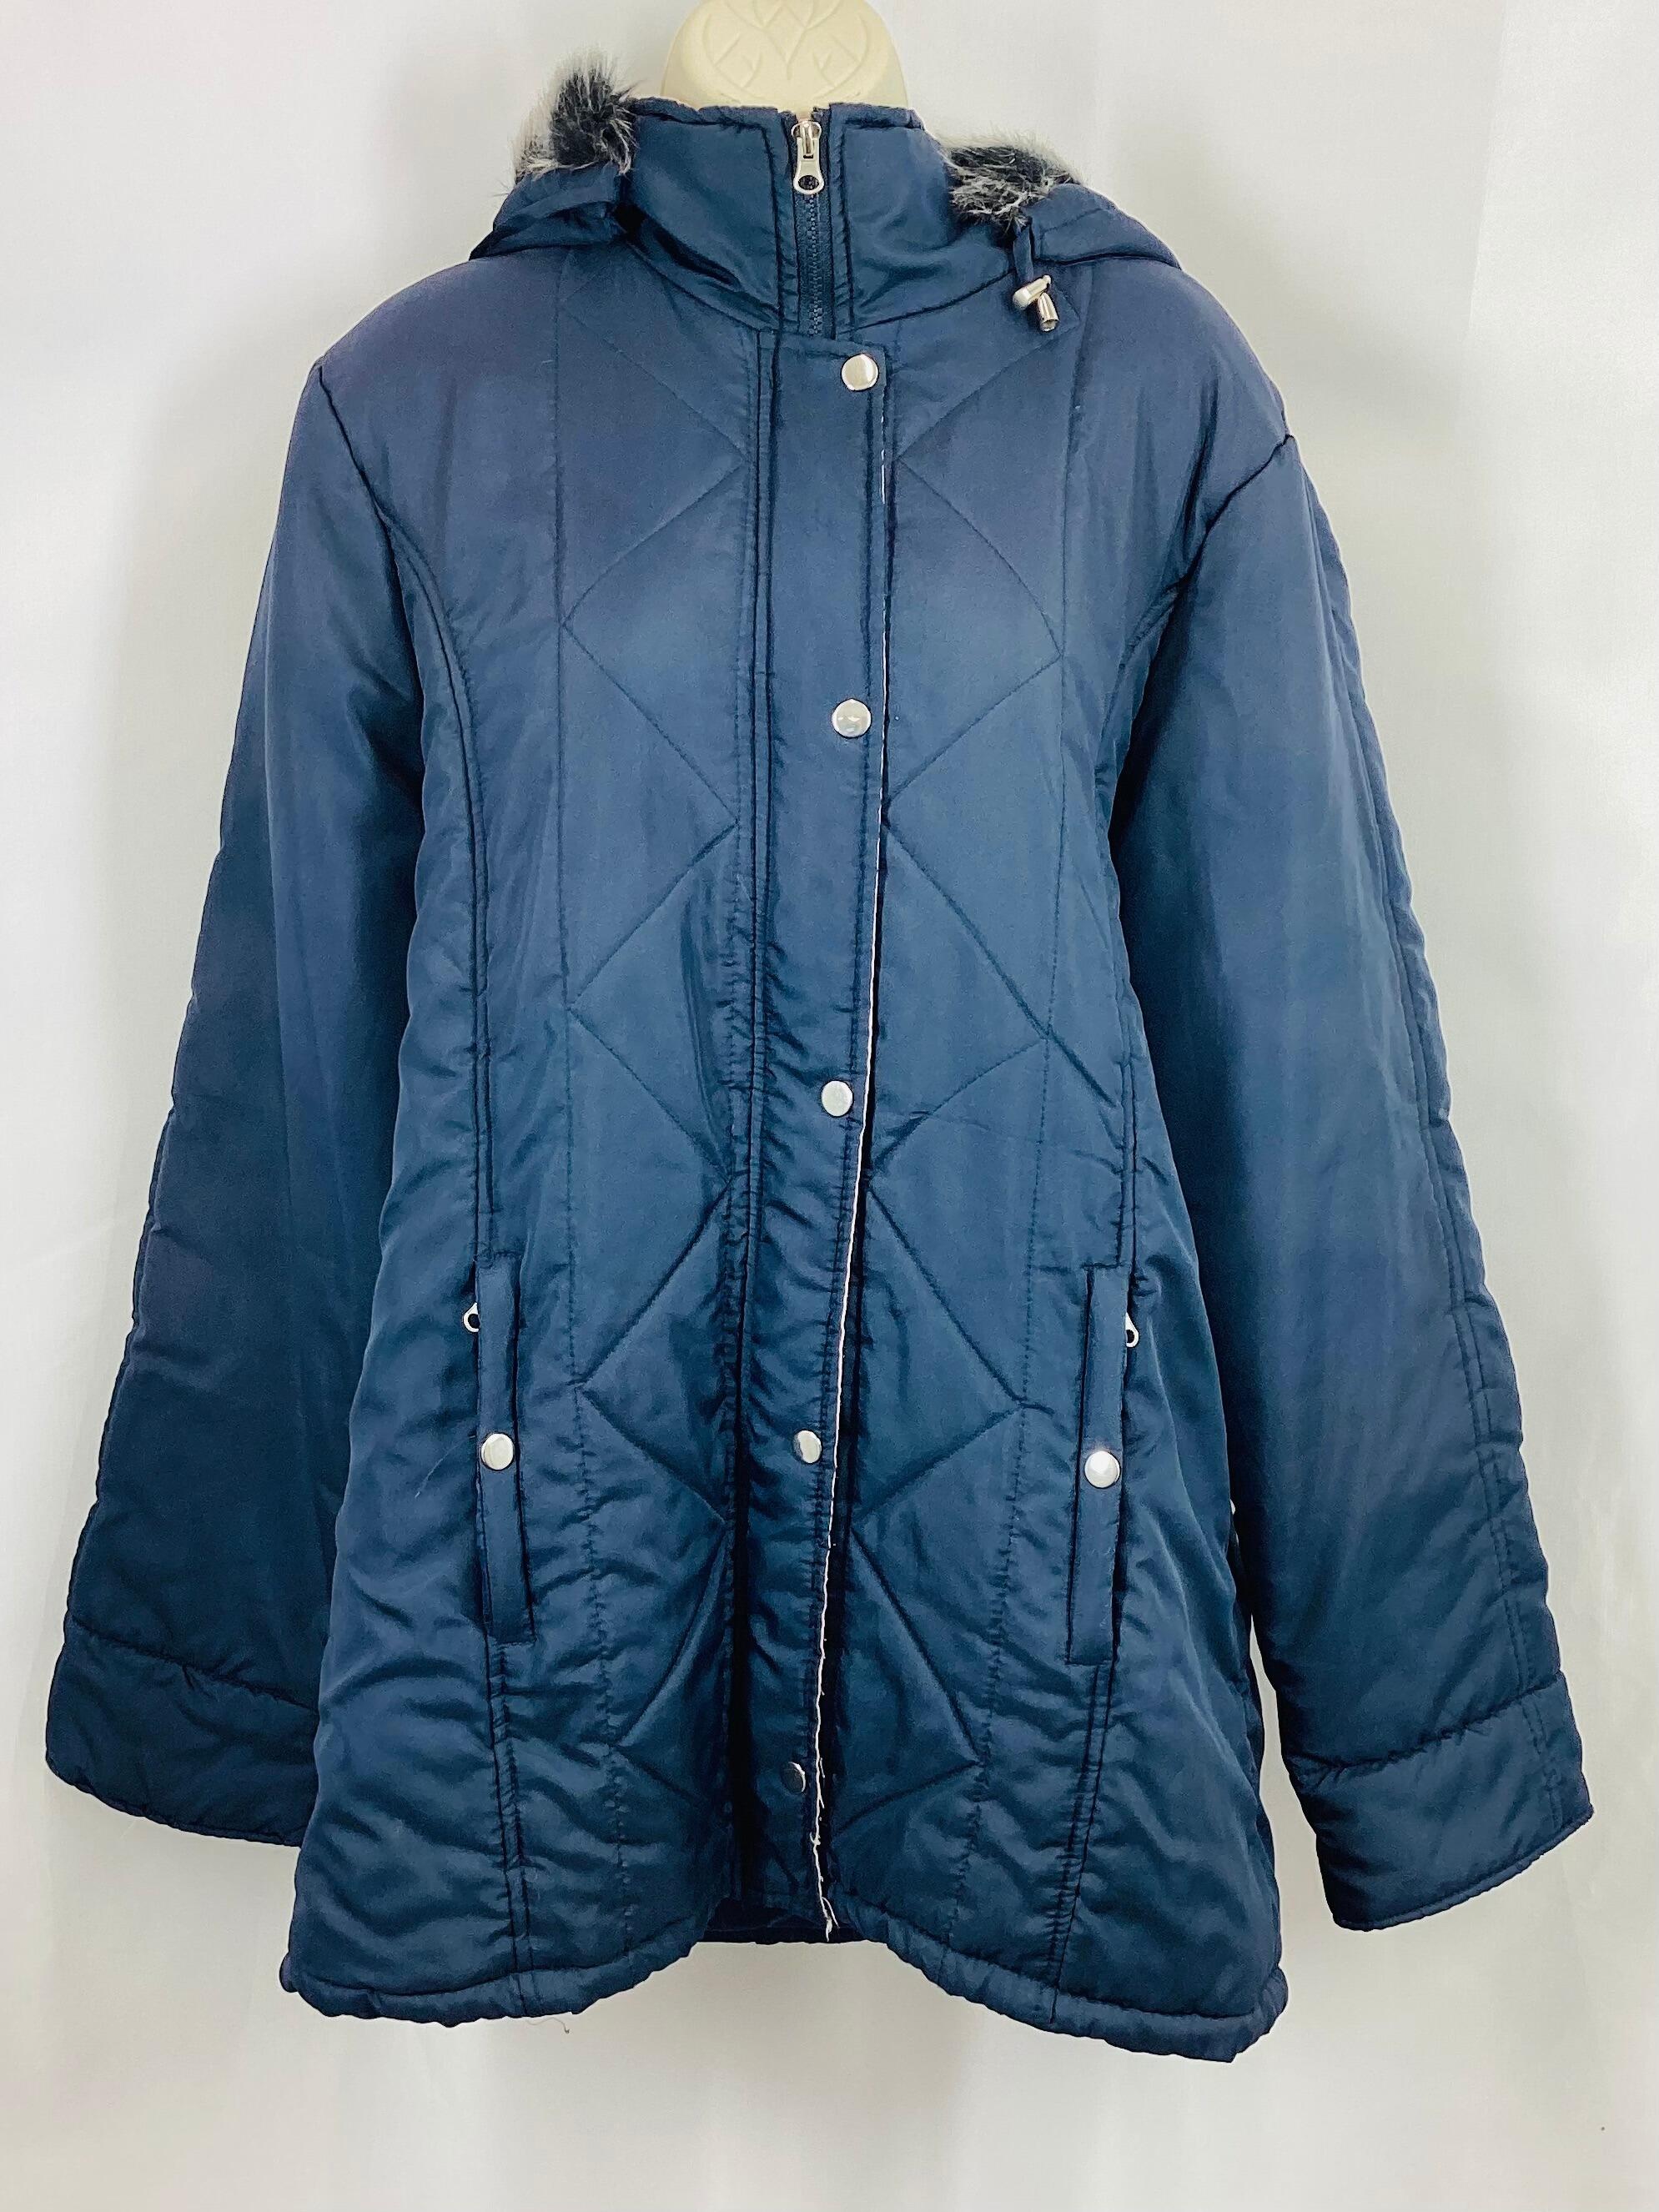 Gabriella Vicenza Navy Quilted Coat UK 16/18